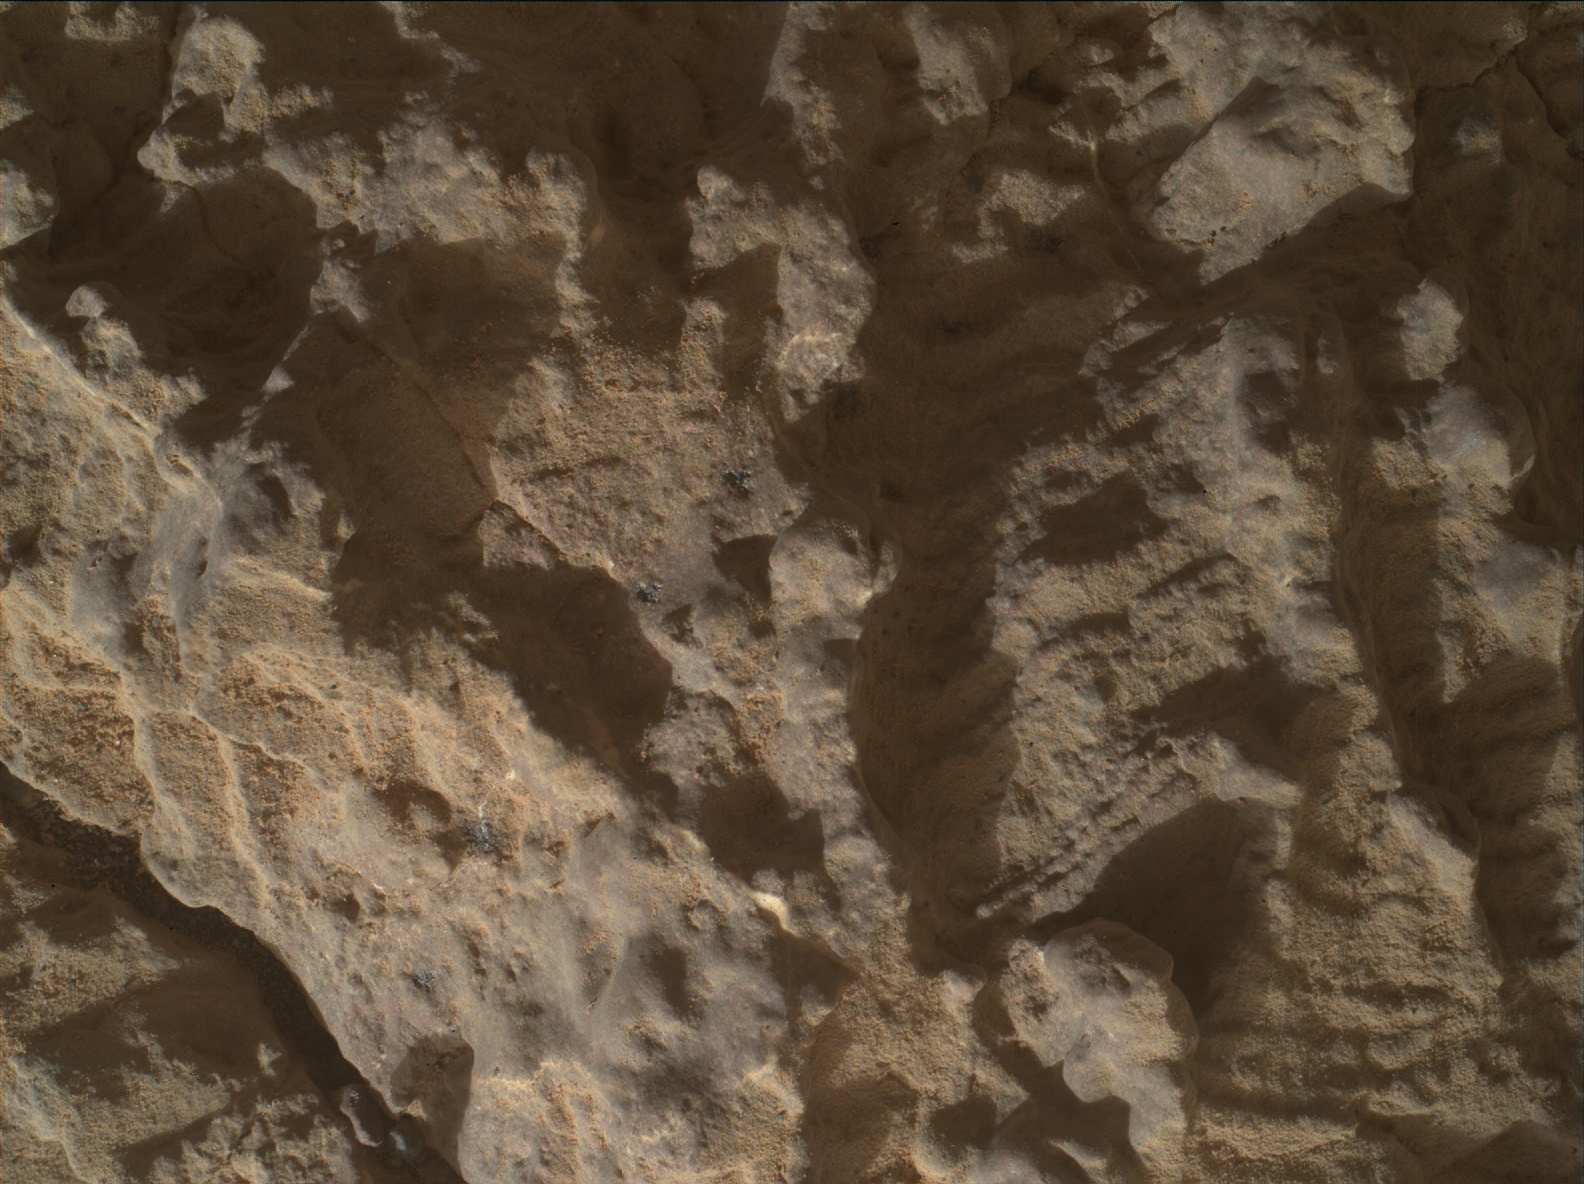 Nasa's Mars rover Curiosity acquired this image using its Mars Hand Lens Imager (MAHLI) on Sol 2451